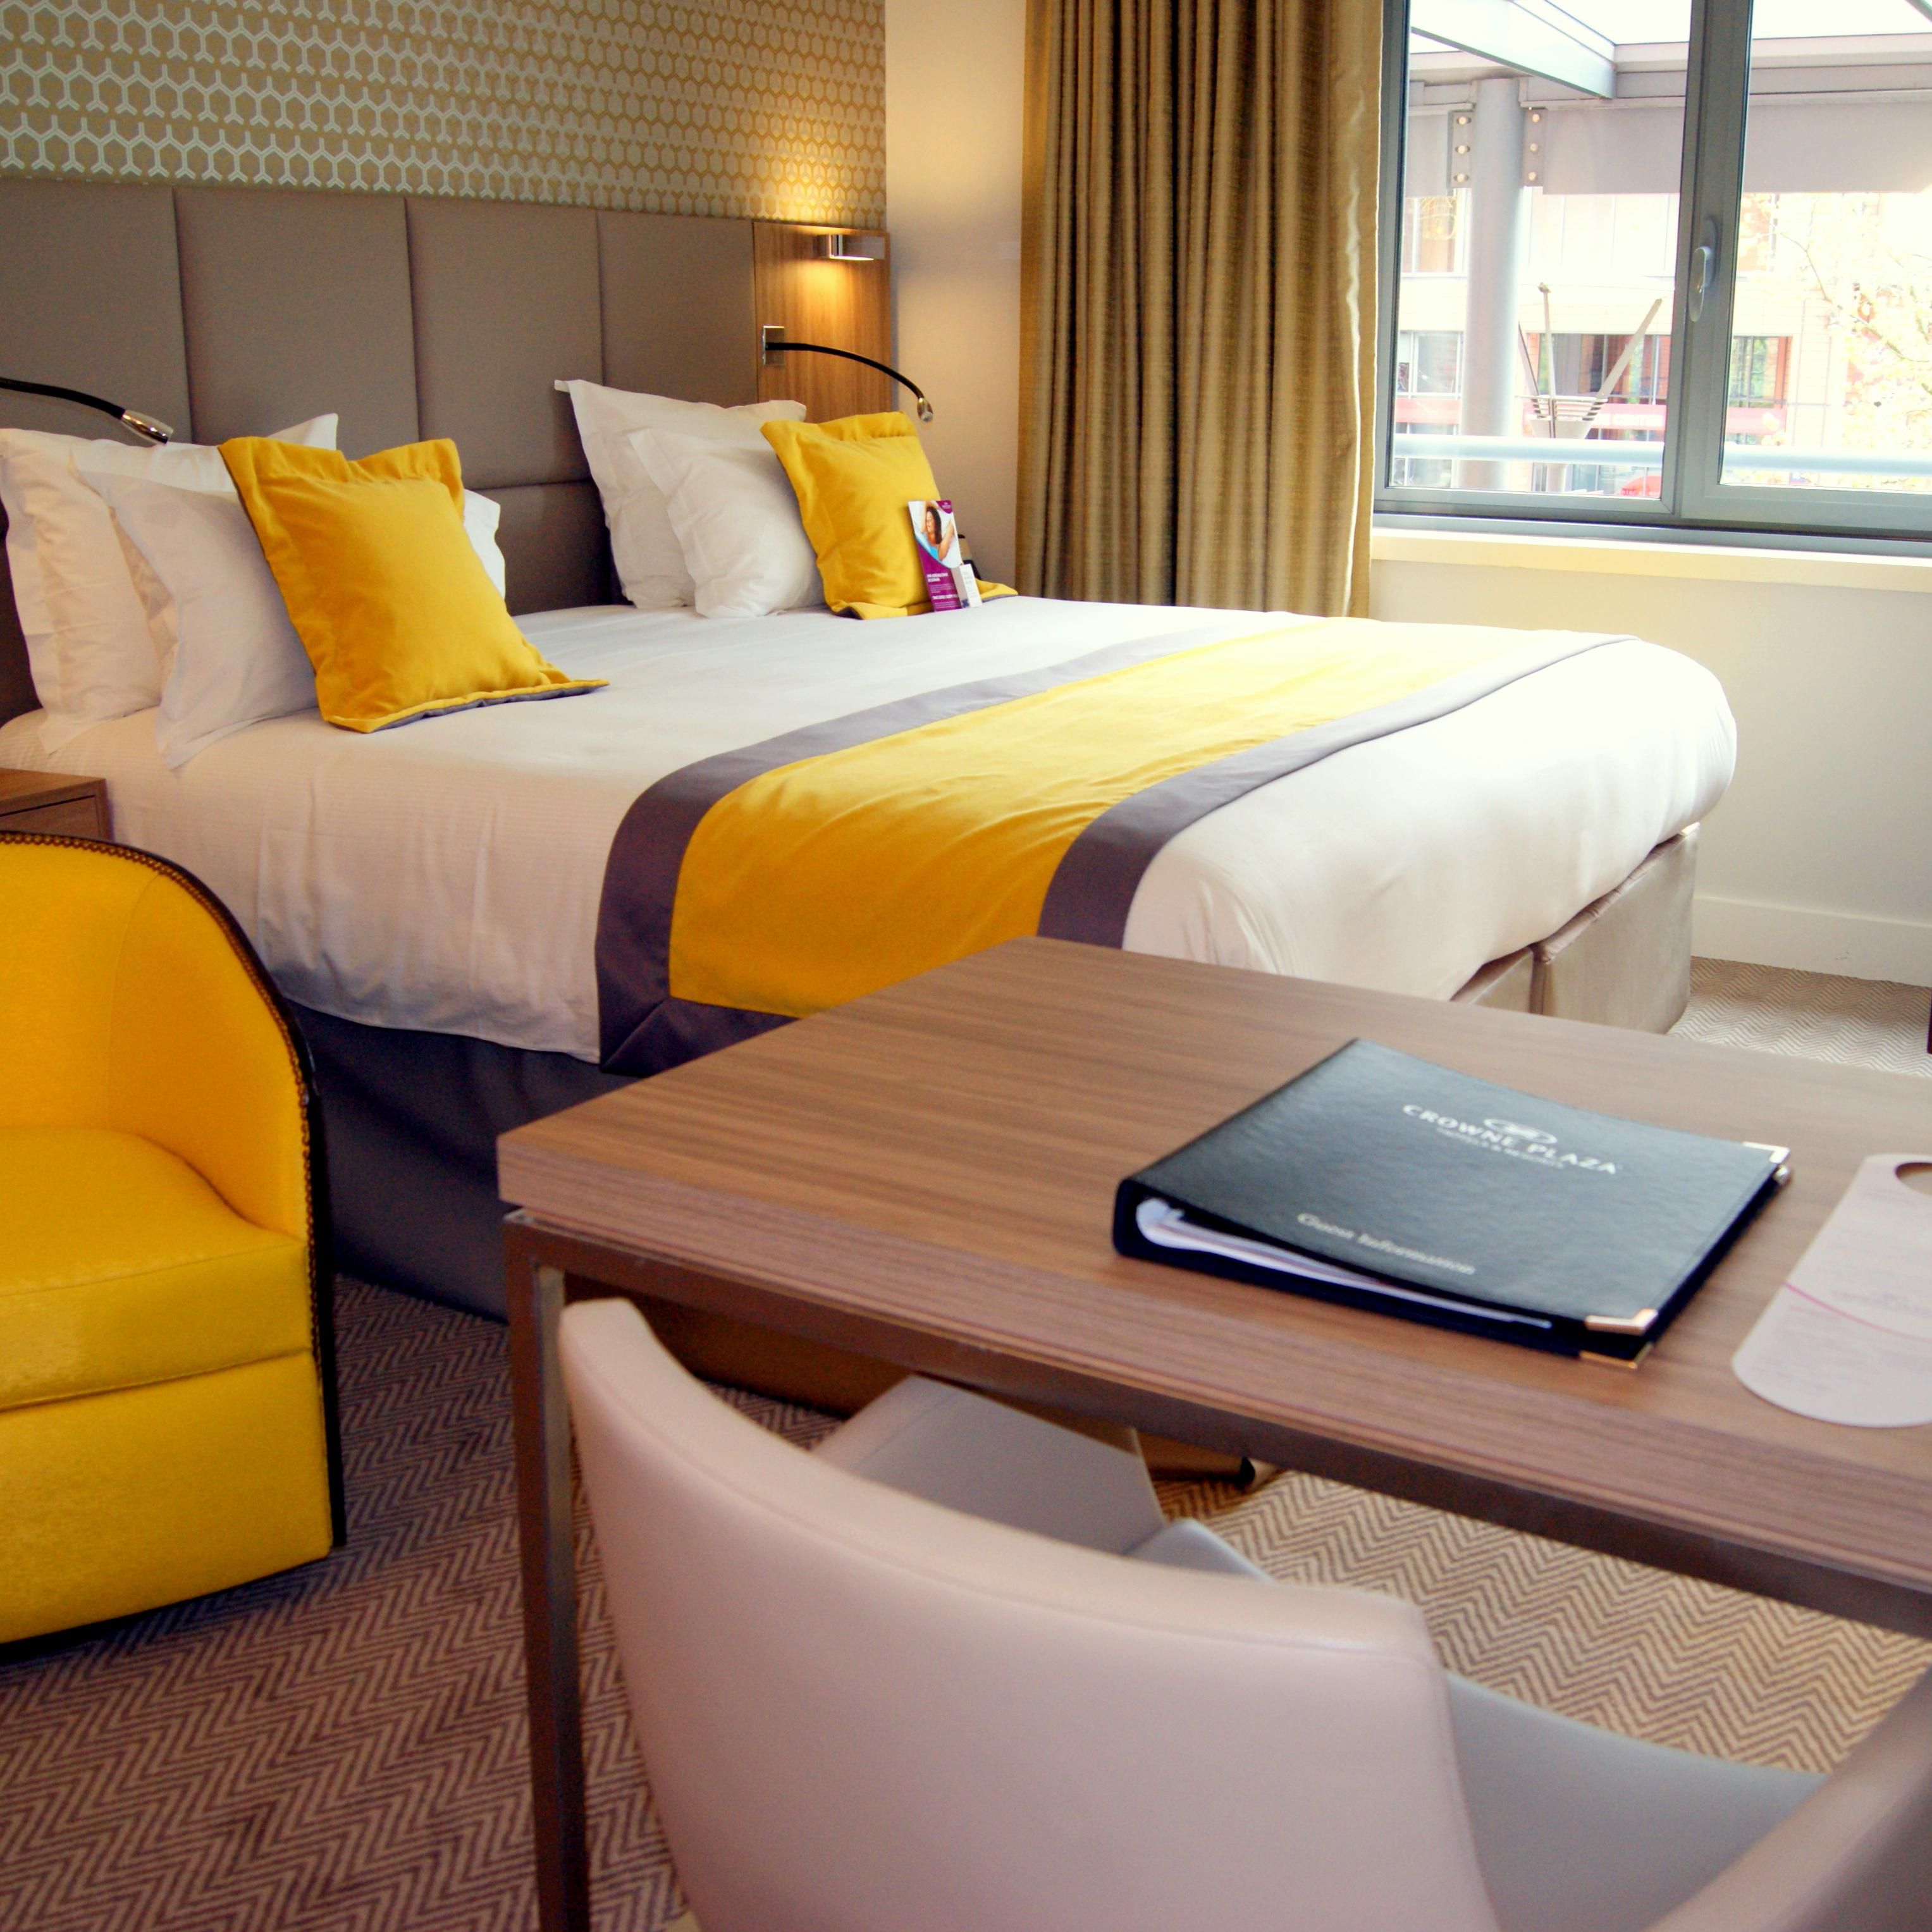 Have a peaceful stay in our renovated and warm room